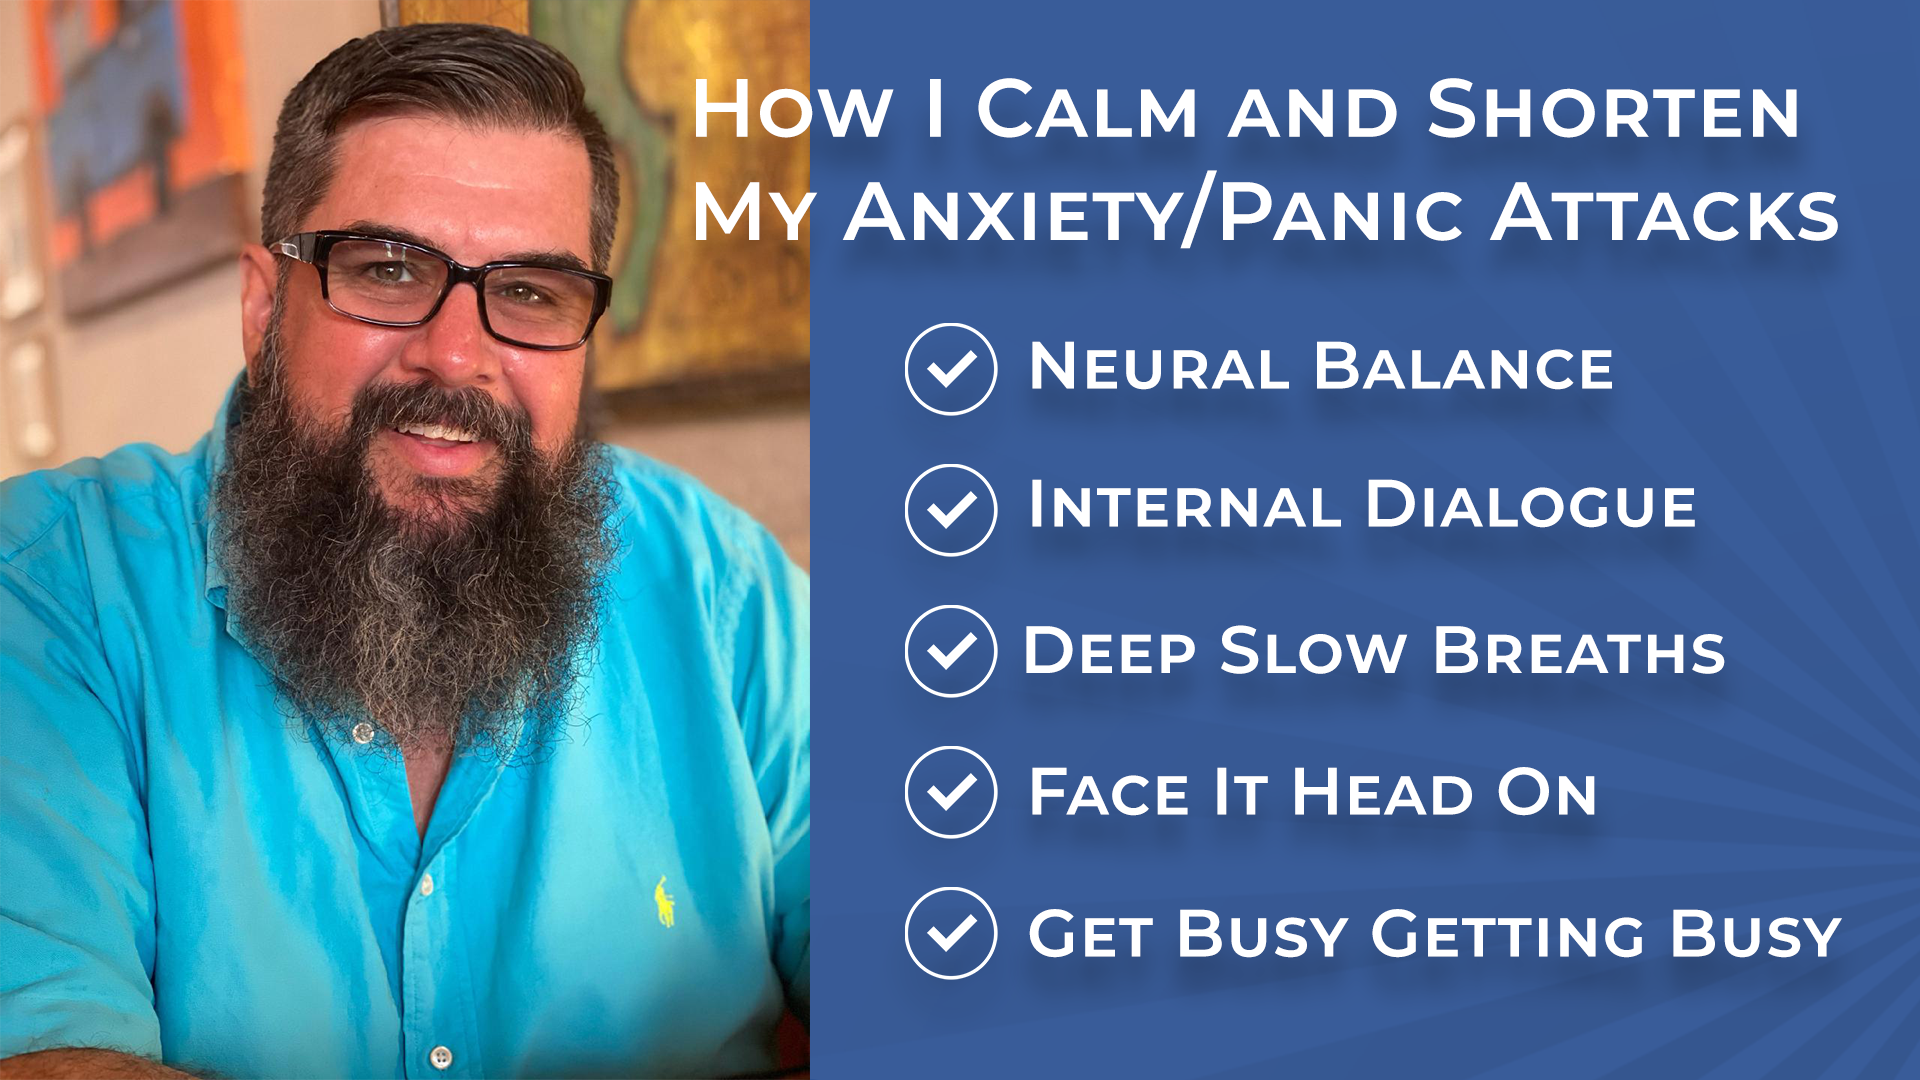 How I Calm and Shorten My Anxiety/Panic Attacks